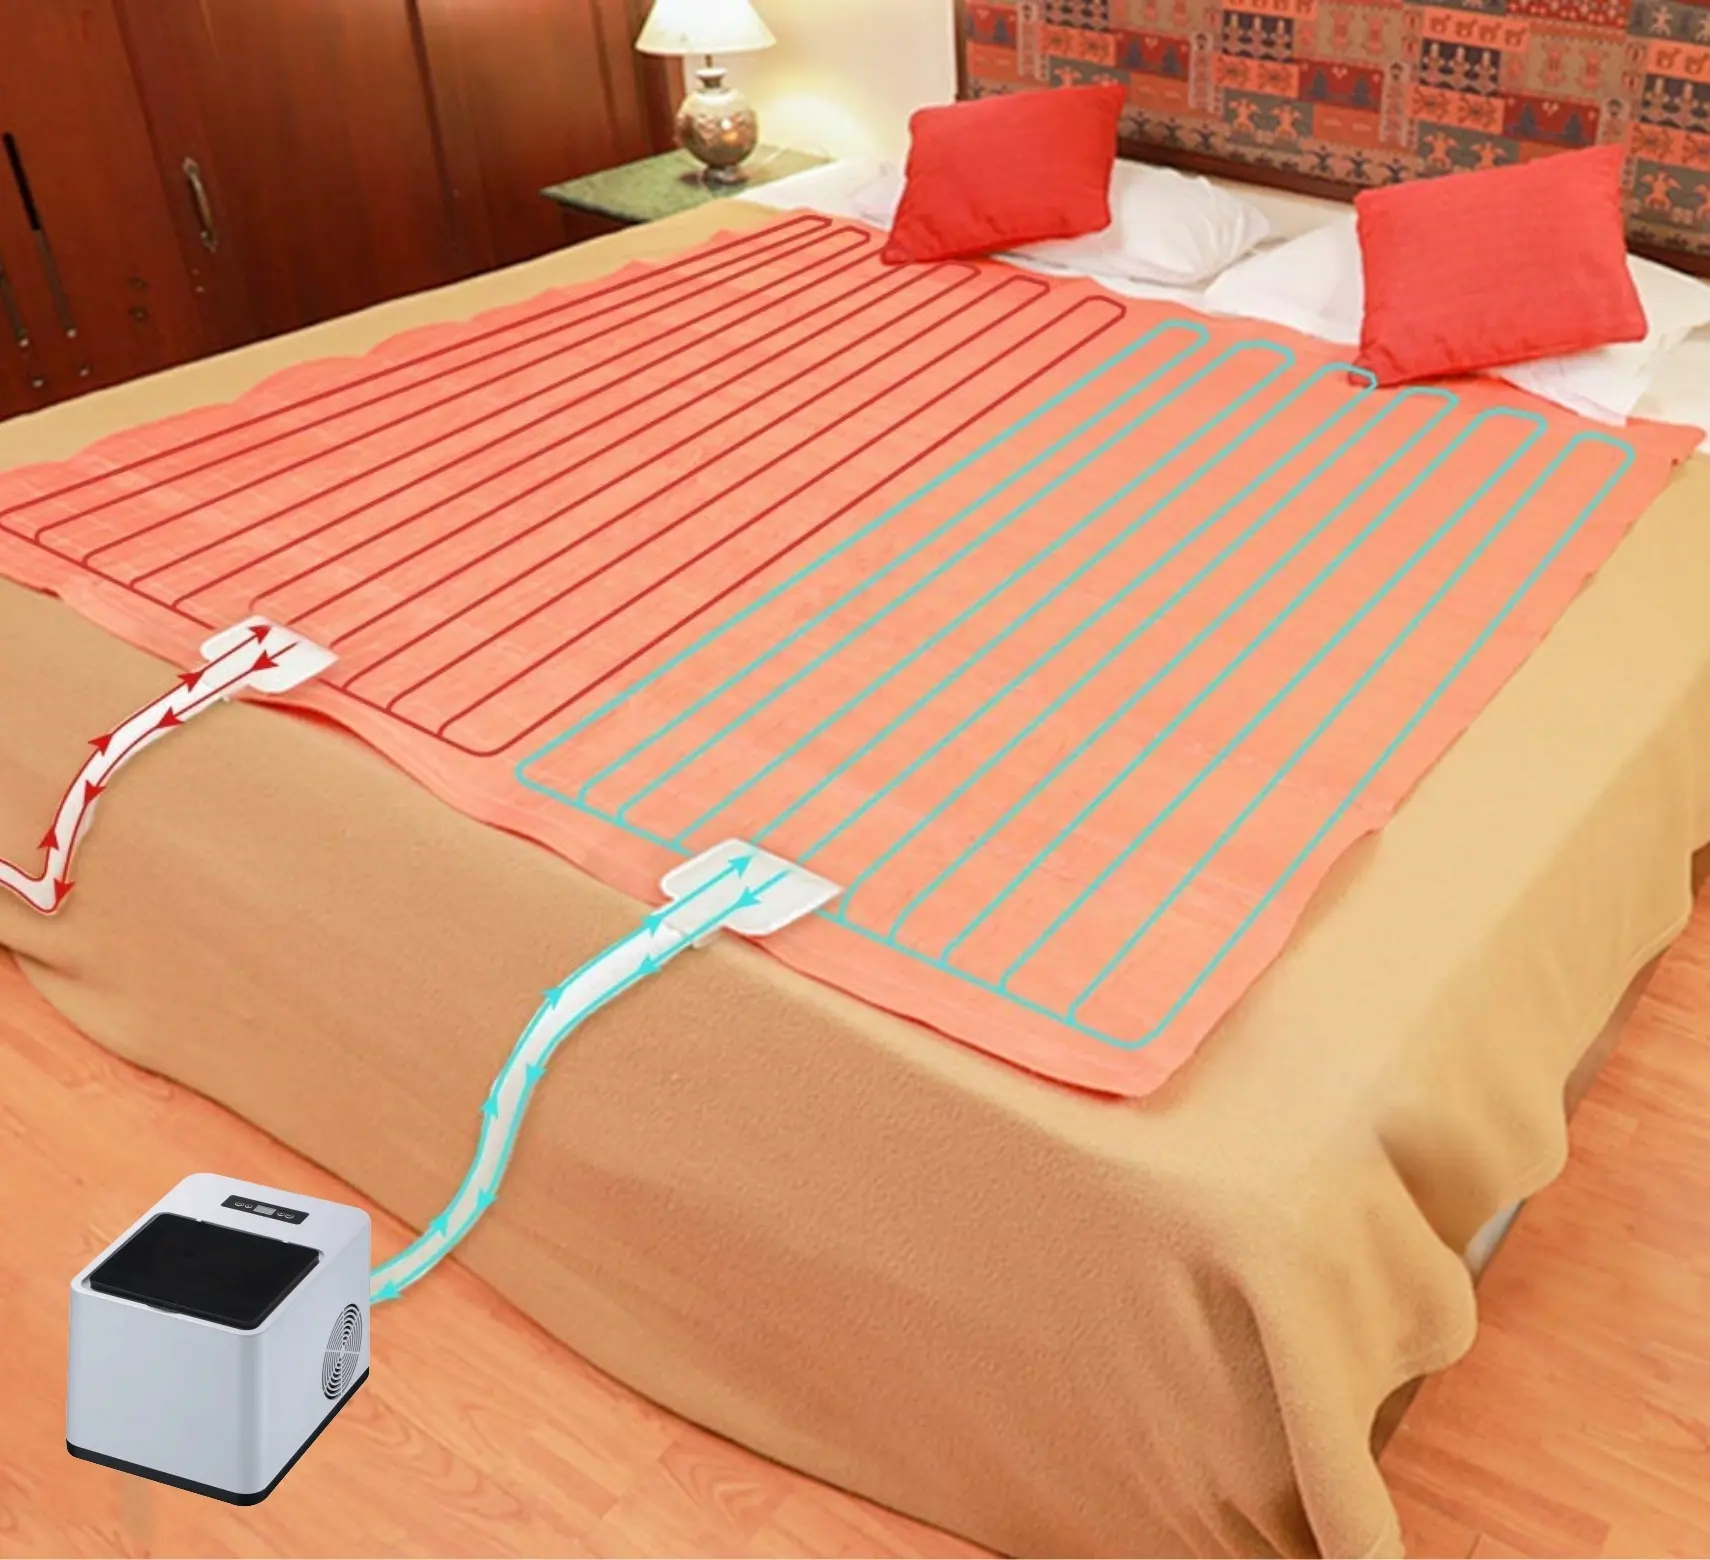 Portable mini Bed blanket Air Cooler Mattress Air Conditioner Water Bed Cooler Ideal for Hot Sleepers